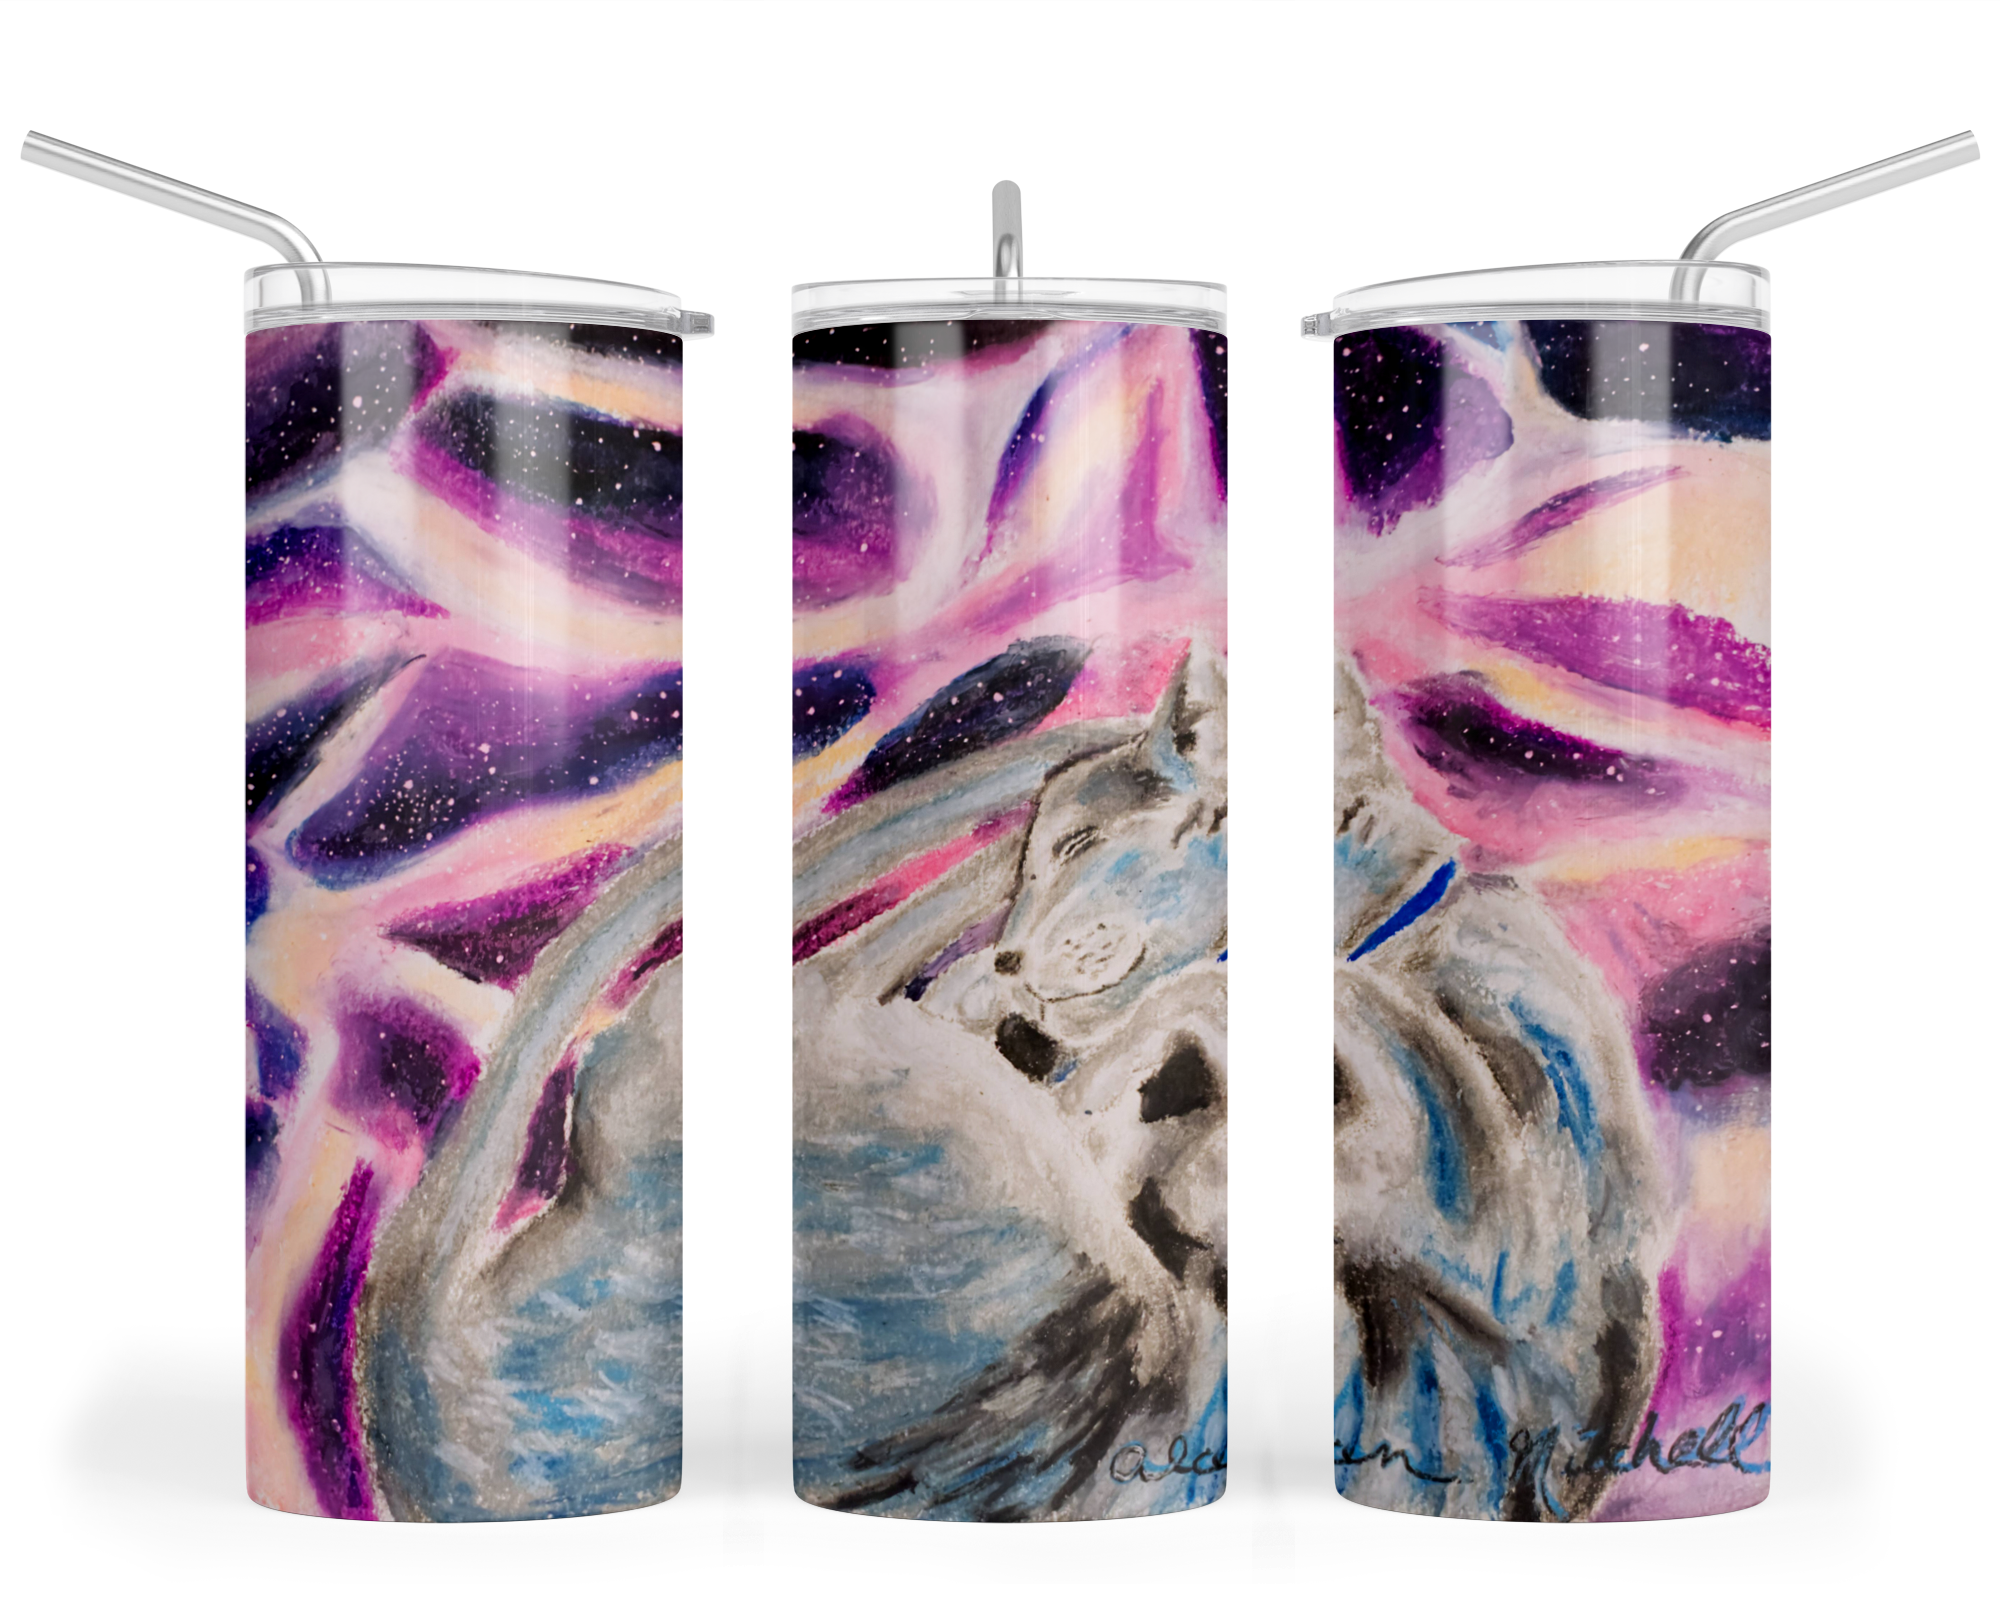 "Sleeping In The Arms Of Oblivion" - Stainless Steel Tumbler